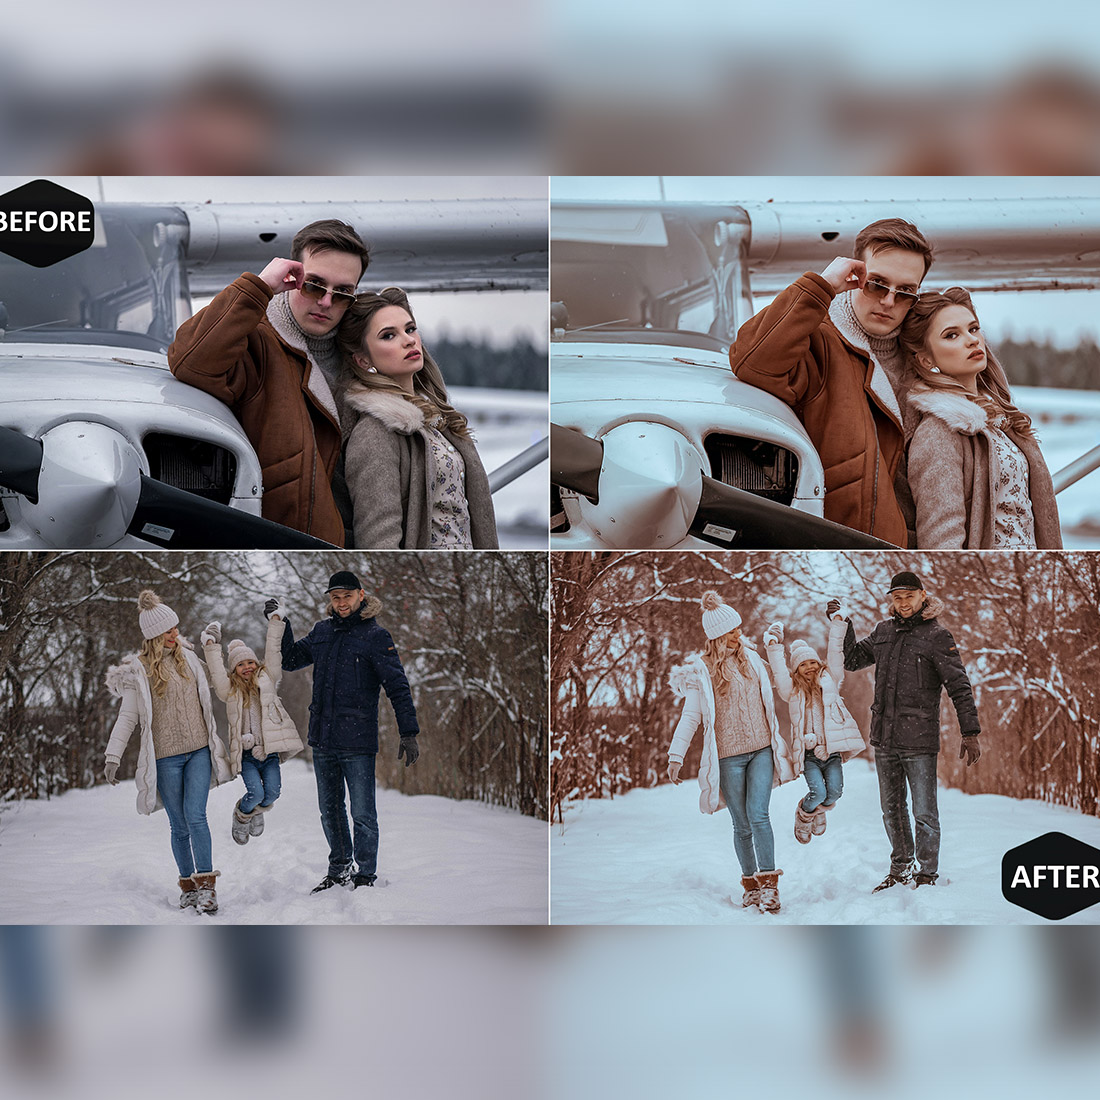 12 Winter Holidays Lightroom Presets, Xmas Mobile Preset, Cocoa Desktop, Blogger And Lifestyle Theme For Instagram LR Filter DNG Portrait preview image.